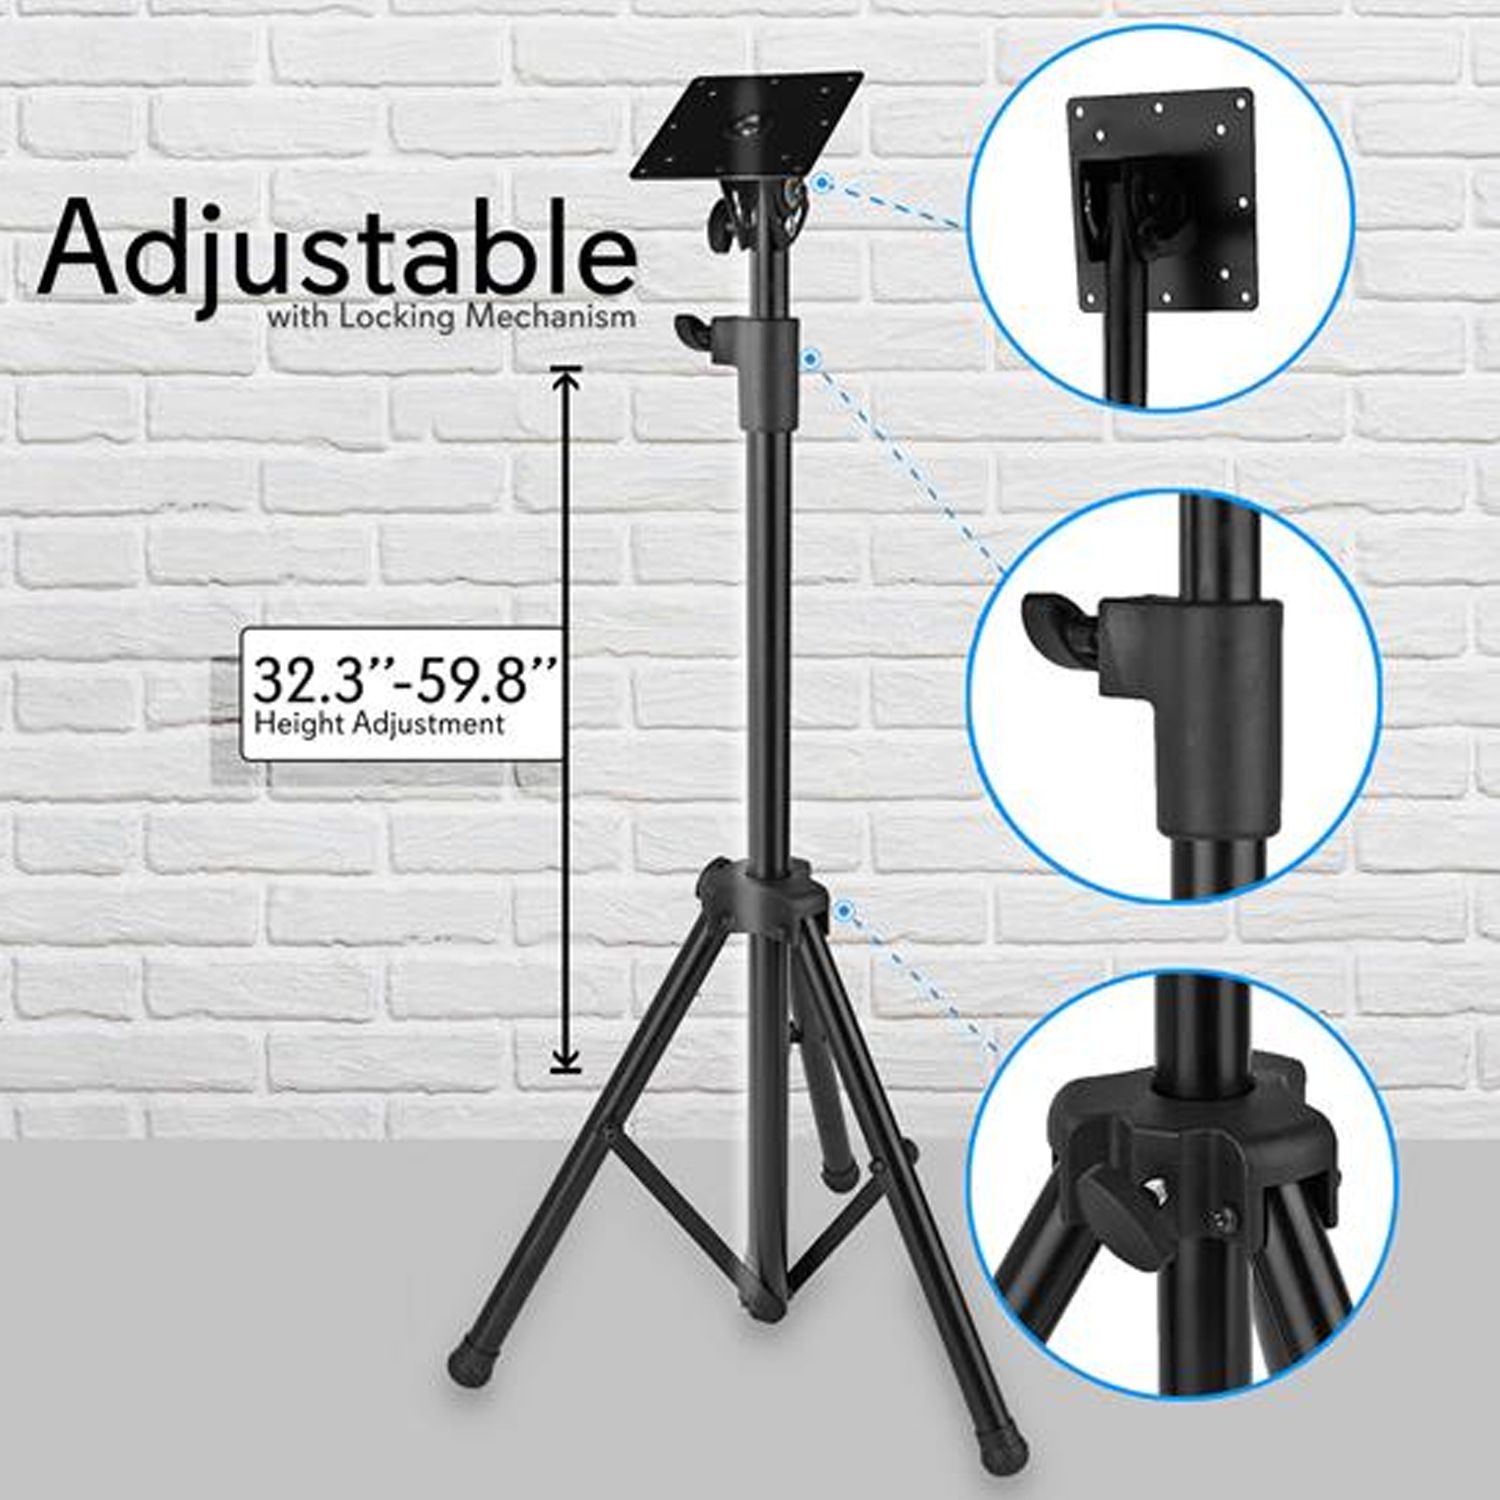 Pyle Foldable Portable Adjustable Height Steel Tripod Flatscreen Tv Within Foldable Portable Adjustable Tv Stands (View 3 of 20)